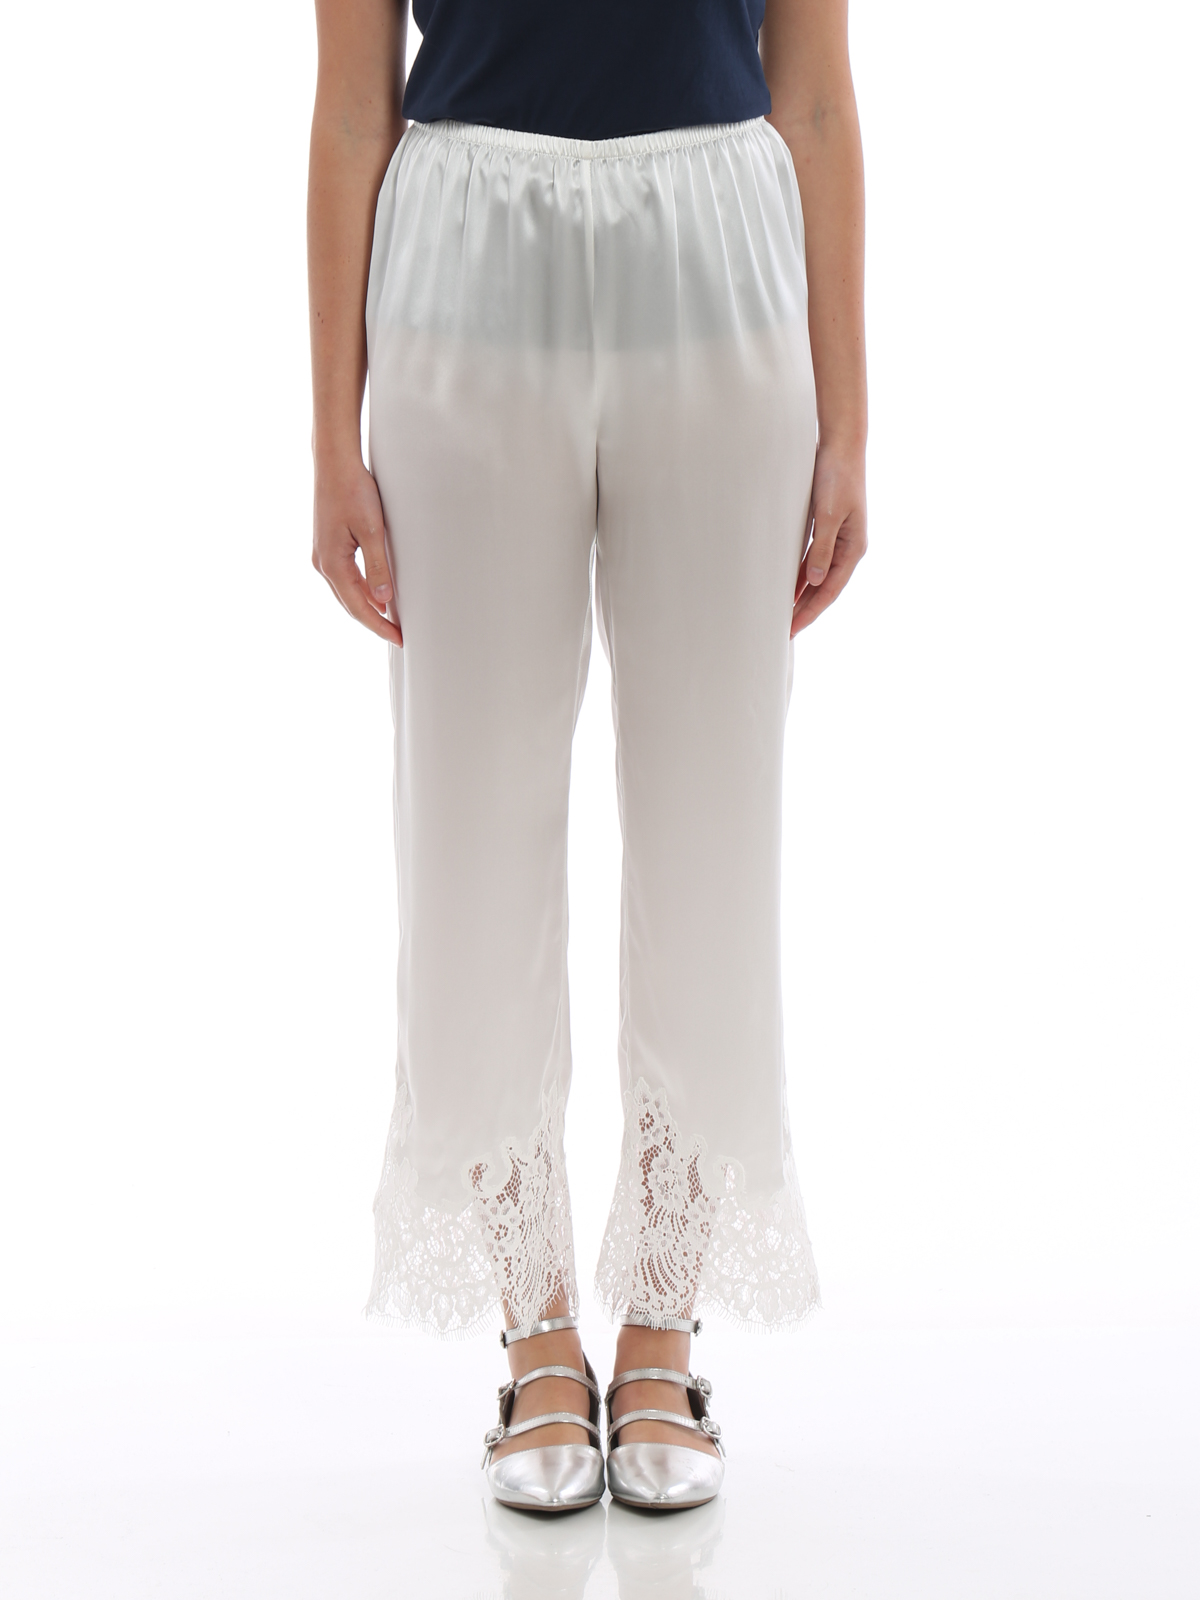 White Lace Top and White Pants – thebridalgods